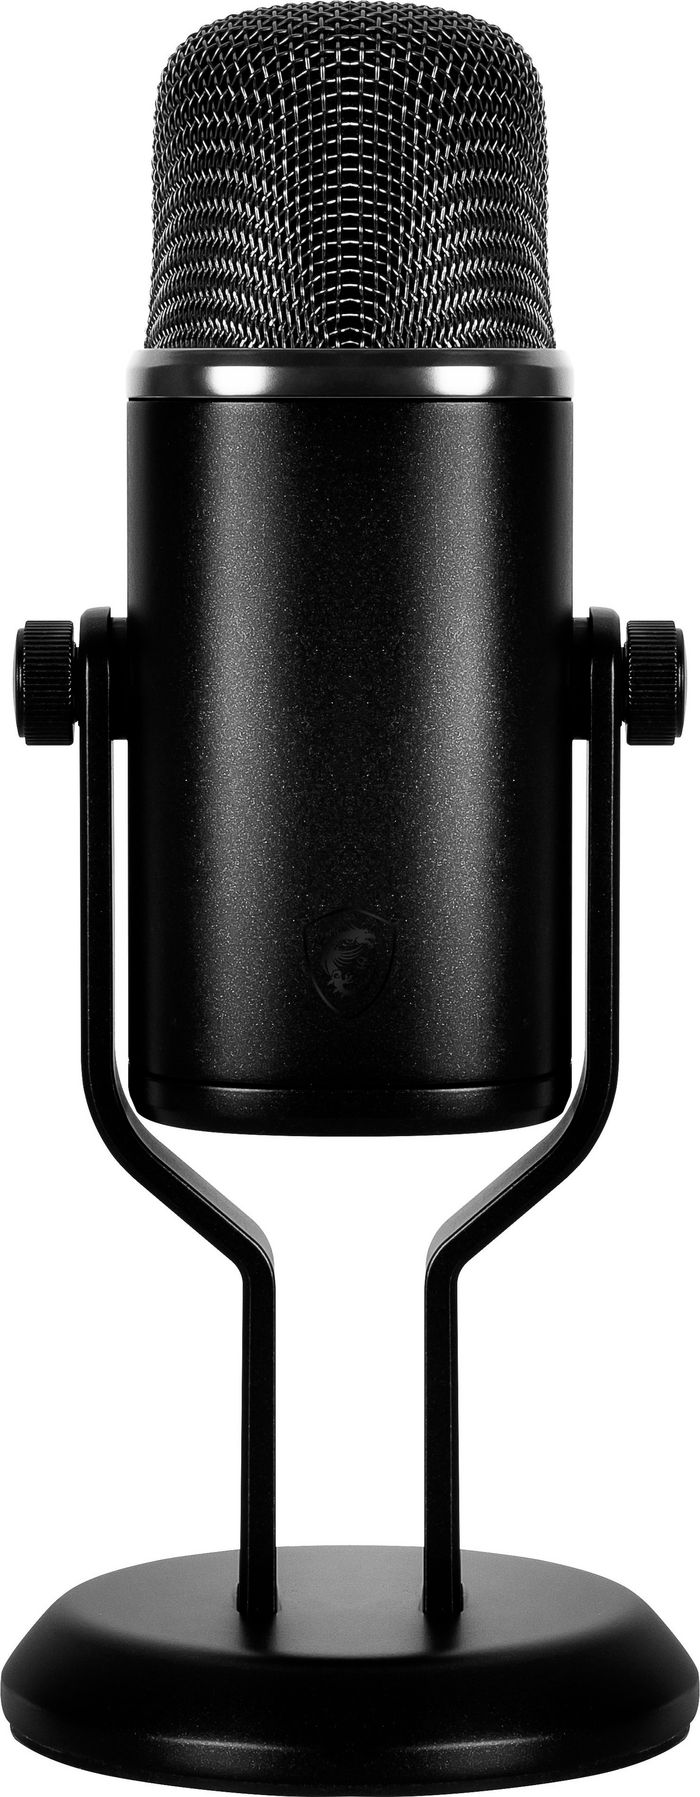 MSI Immerse Gv60 Streaming Mic 'Usb Type-C Interface And 3.5Mm Aux, For Professional Applications With Intuituve Control In 4 Modes: Stereo, Omnidirectional, Cardioid And Bidirectional' - W128274010